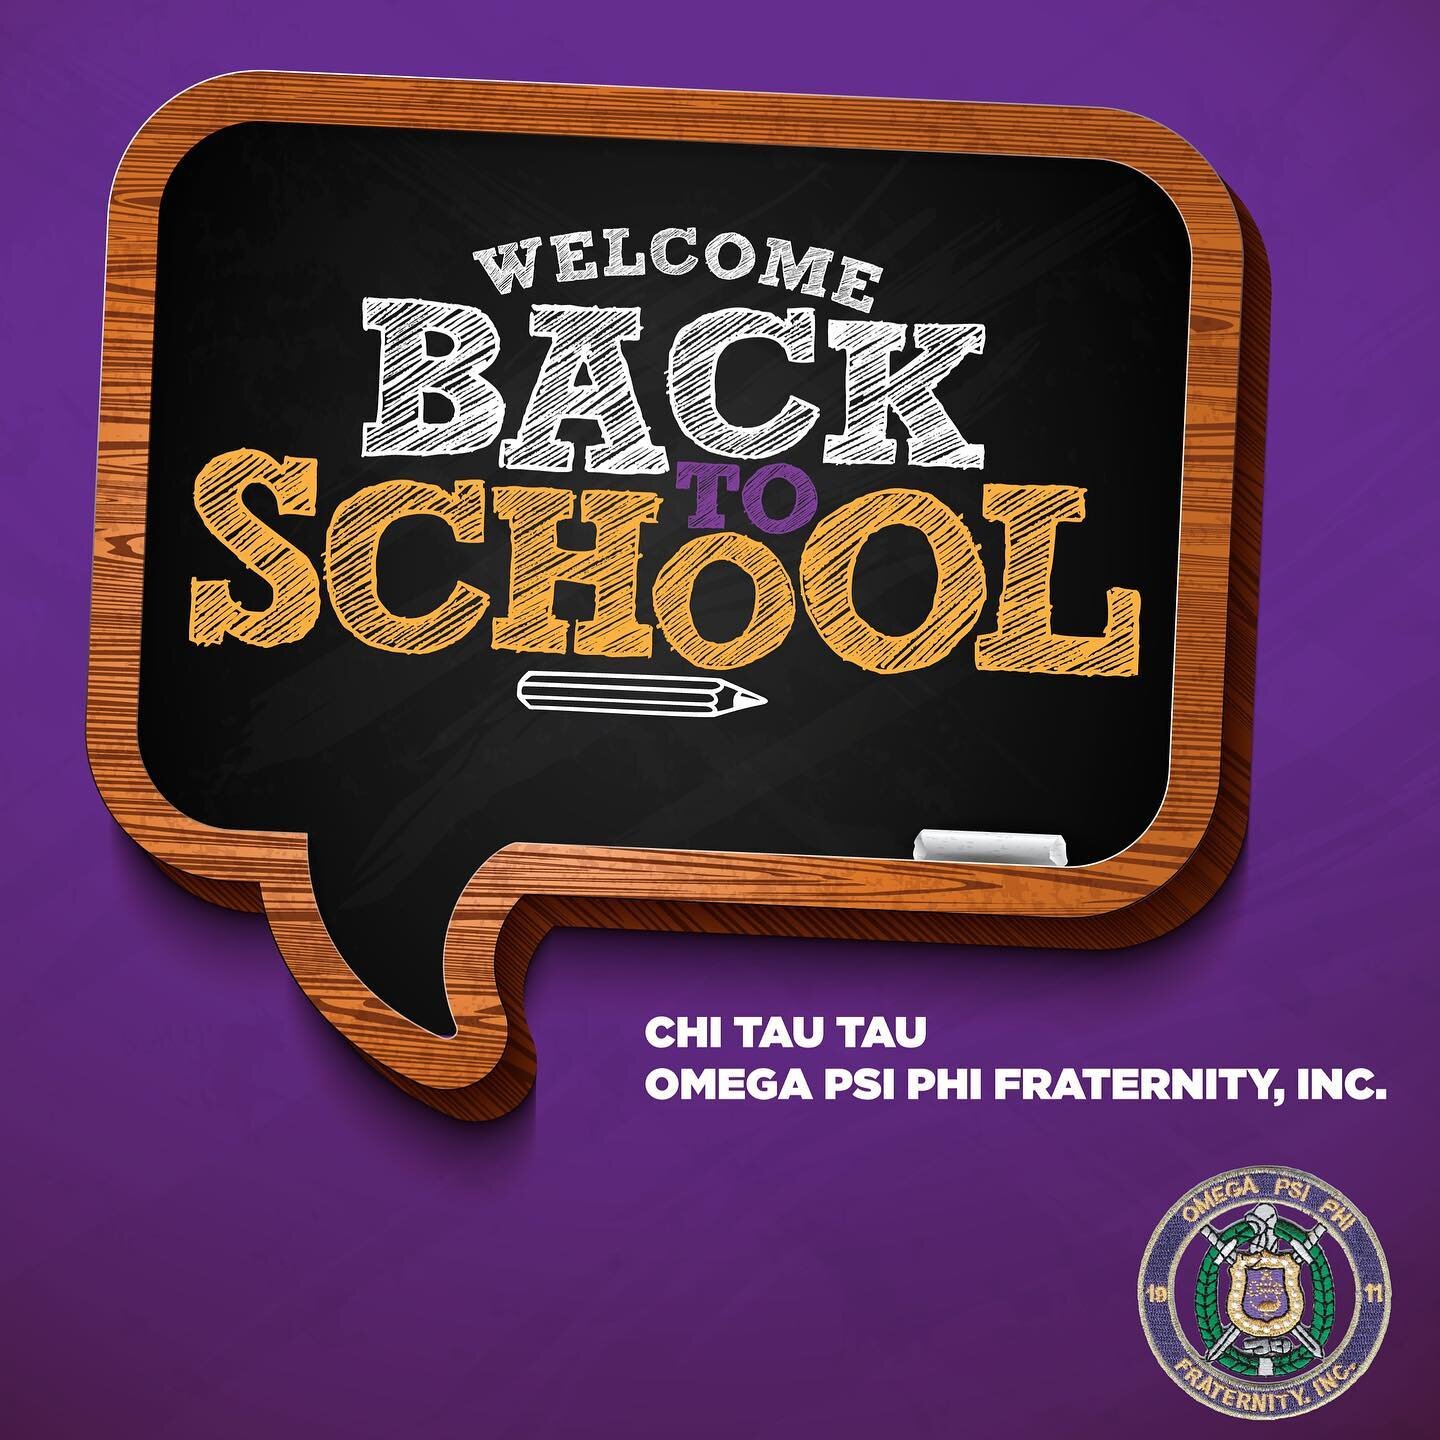 The Brothers of the Chi Tau Tau Chapter of the Mighty Omega Psi Phi Fraternity, Inc. would like to welcome all incoming freshmen, transfer, and returning students back to campus this Spring. Let's all Charge On and have a great semester! 🐶⚡️

#longl